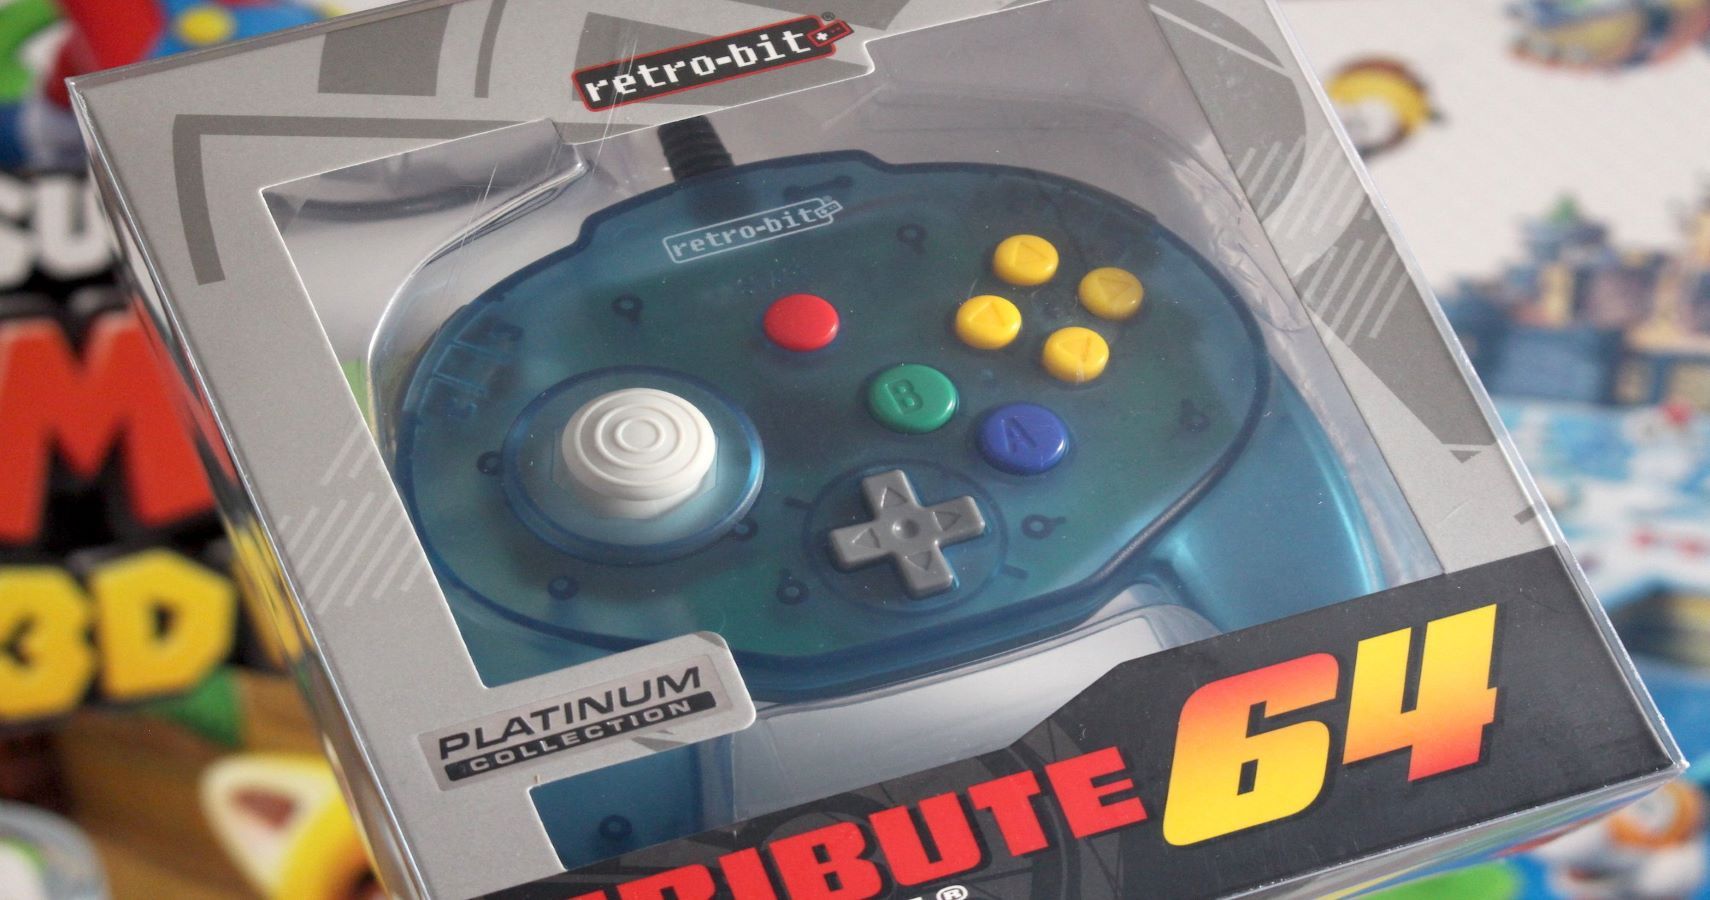 nintendo 64 controller for switch